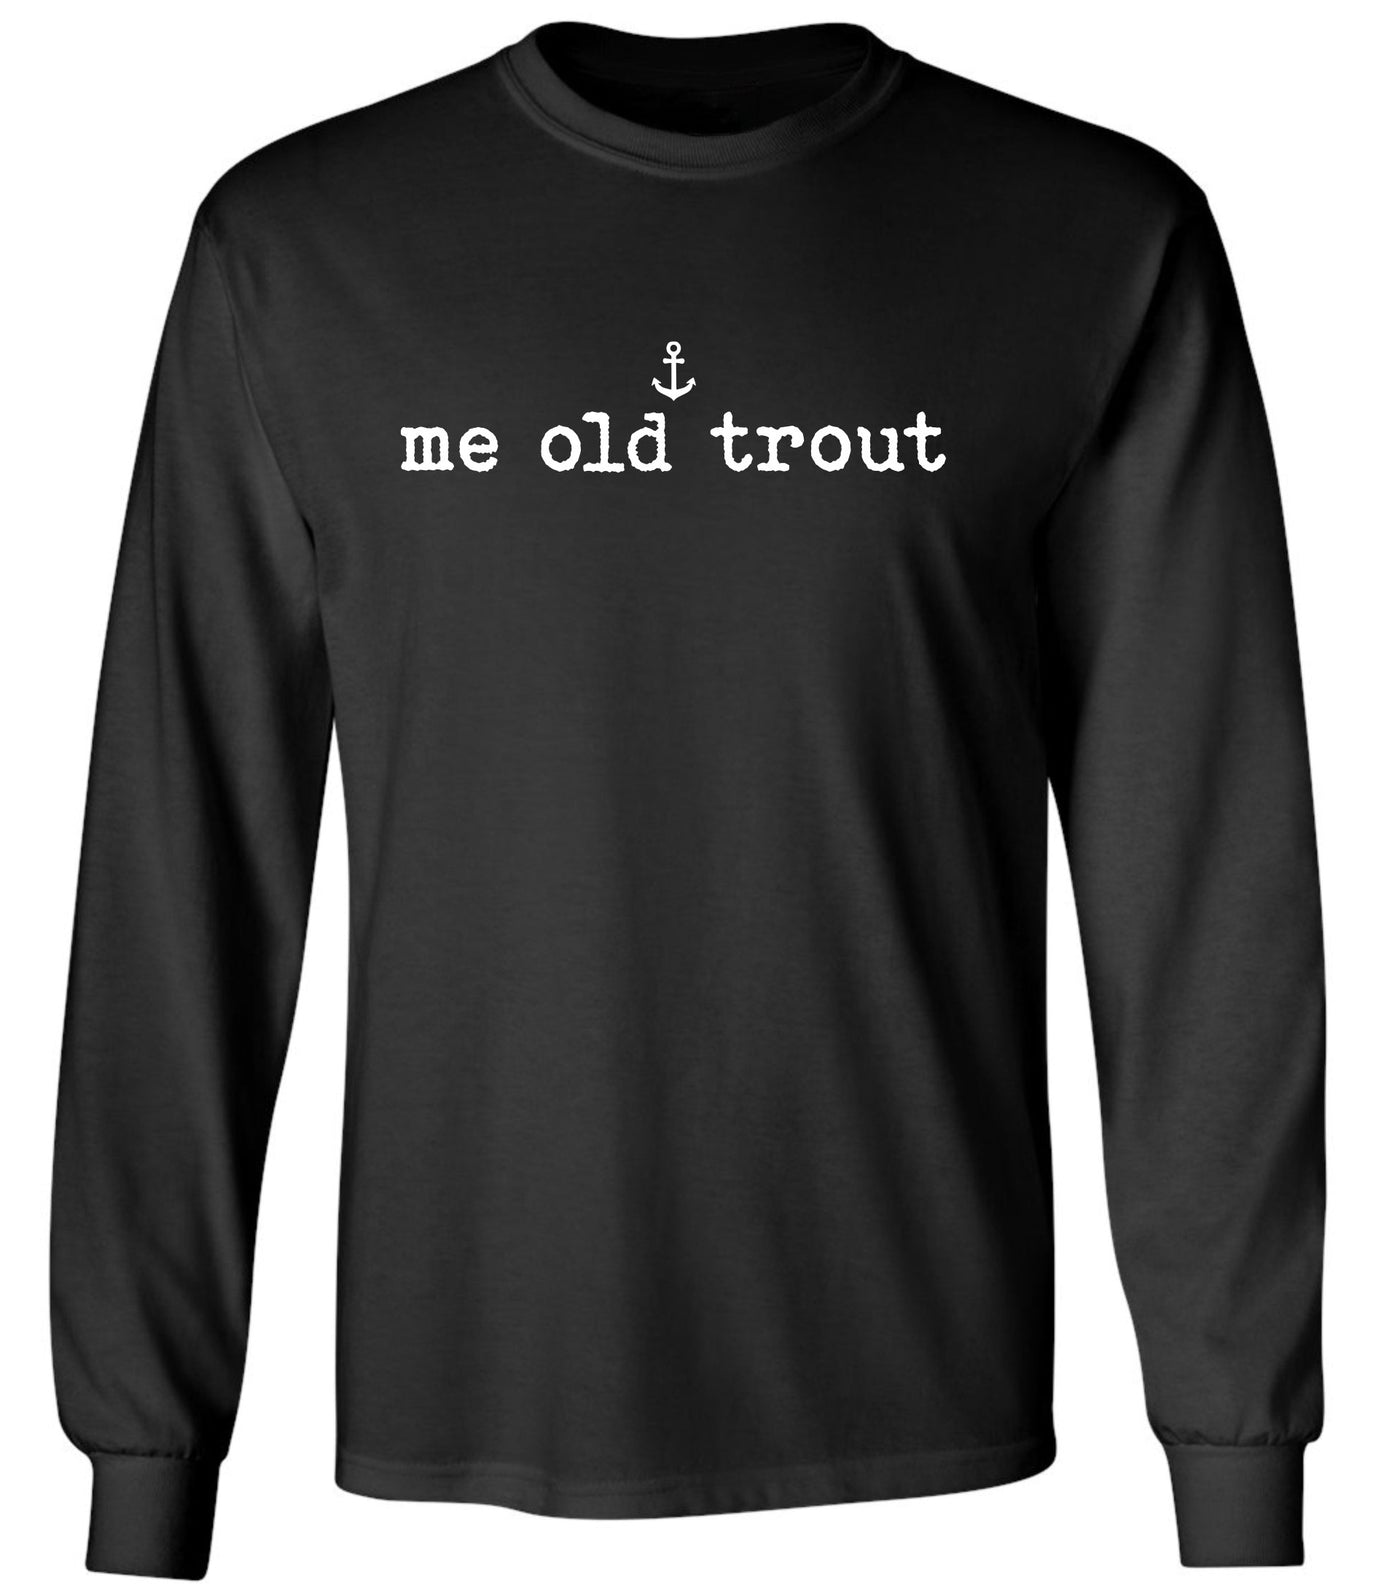 "Me Old Trout" Unisex Long Sleeve Shirt